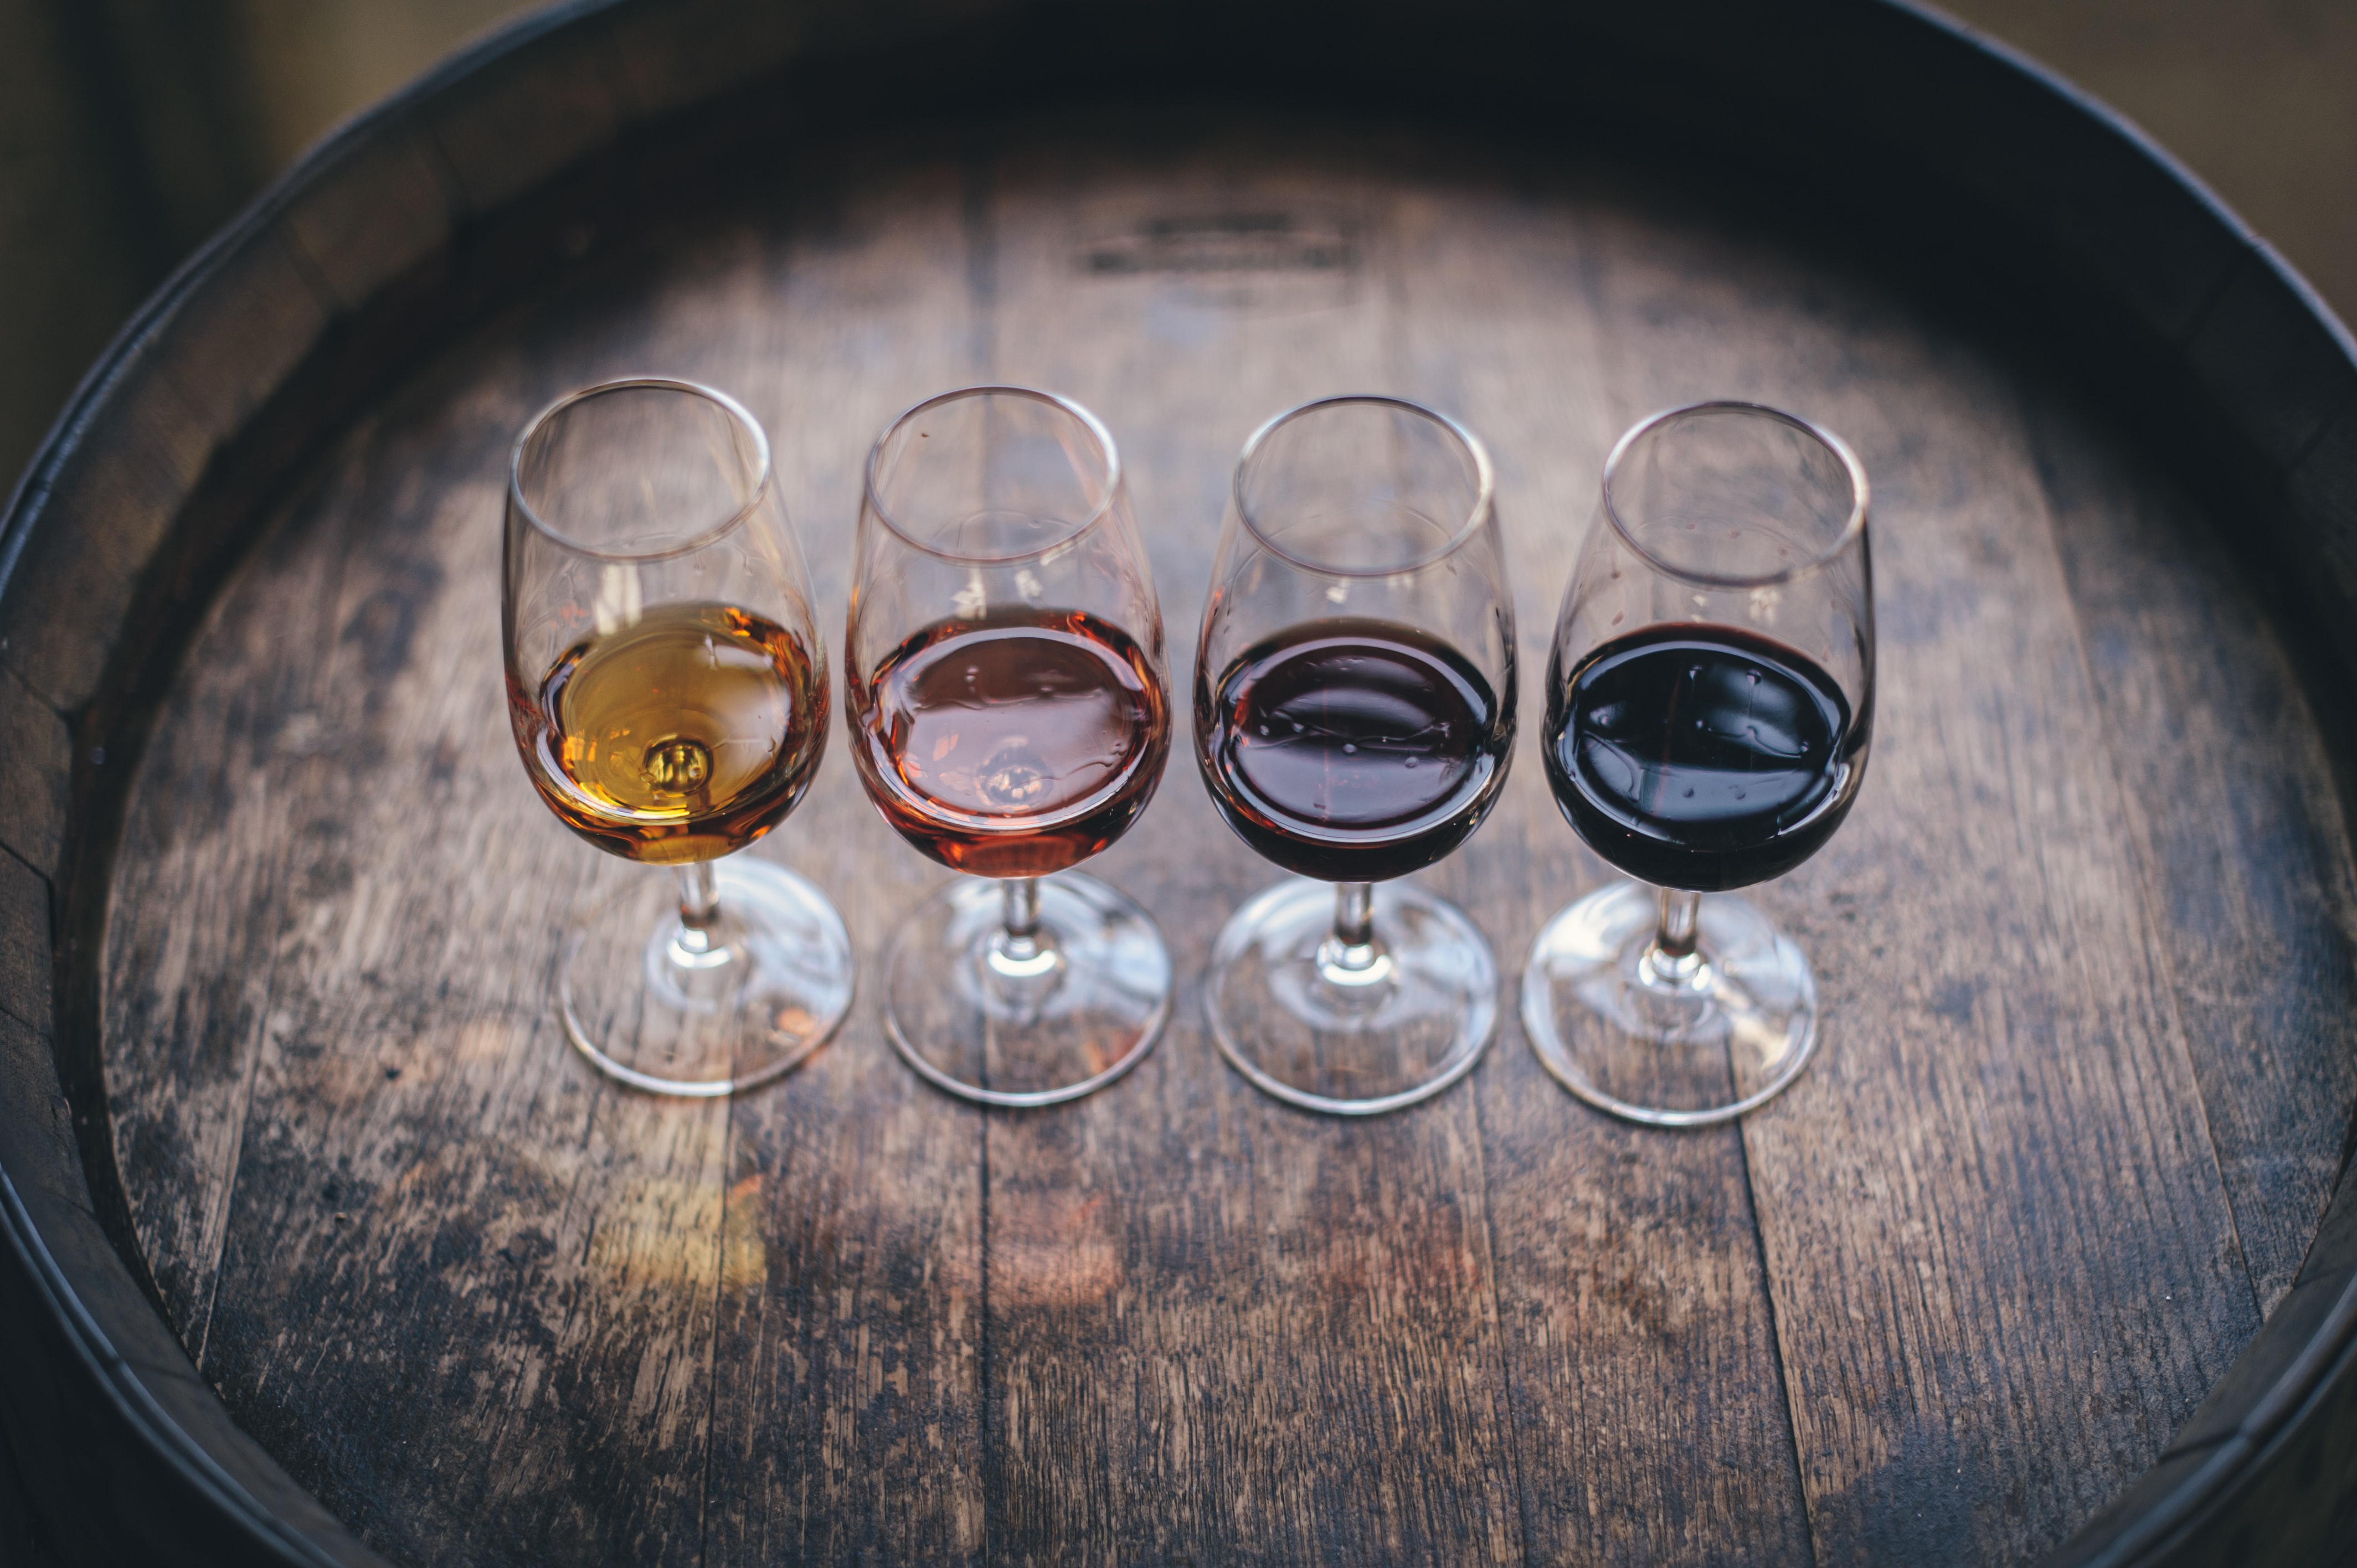 Wine Alcohol Content Guide for Every Type of Wine